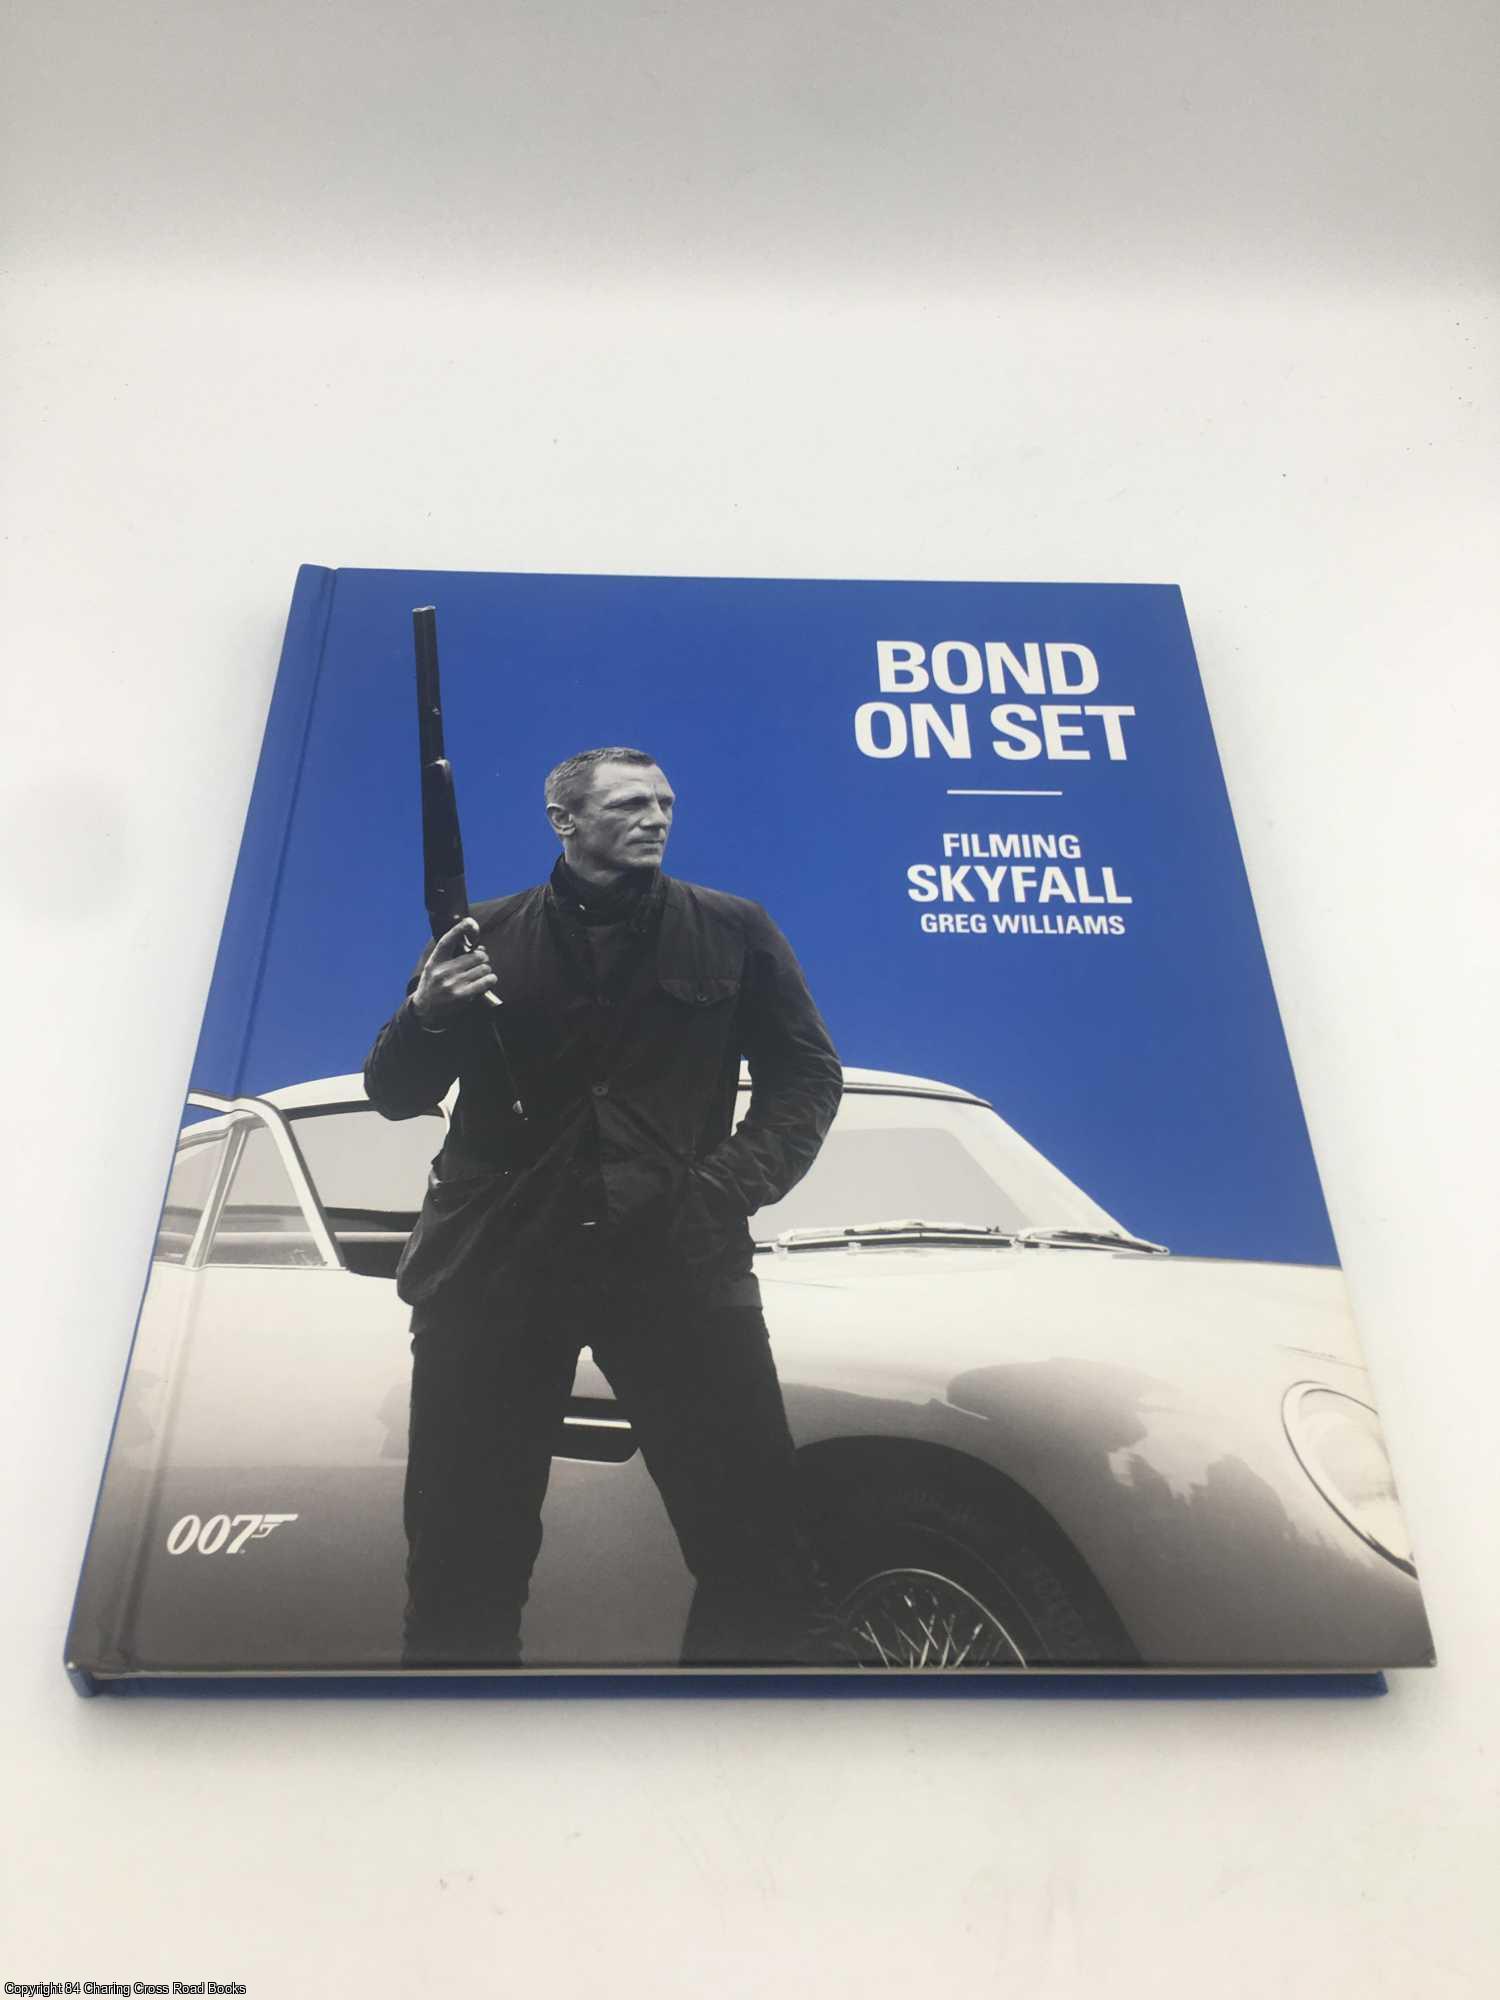 Bond On Set Filming Skyfall: 007 by Greg Williams on 84 Charing Cross Rare  Books